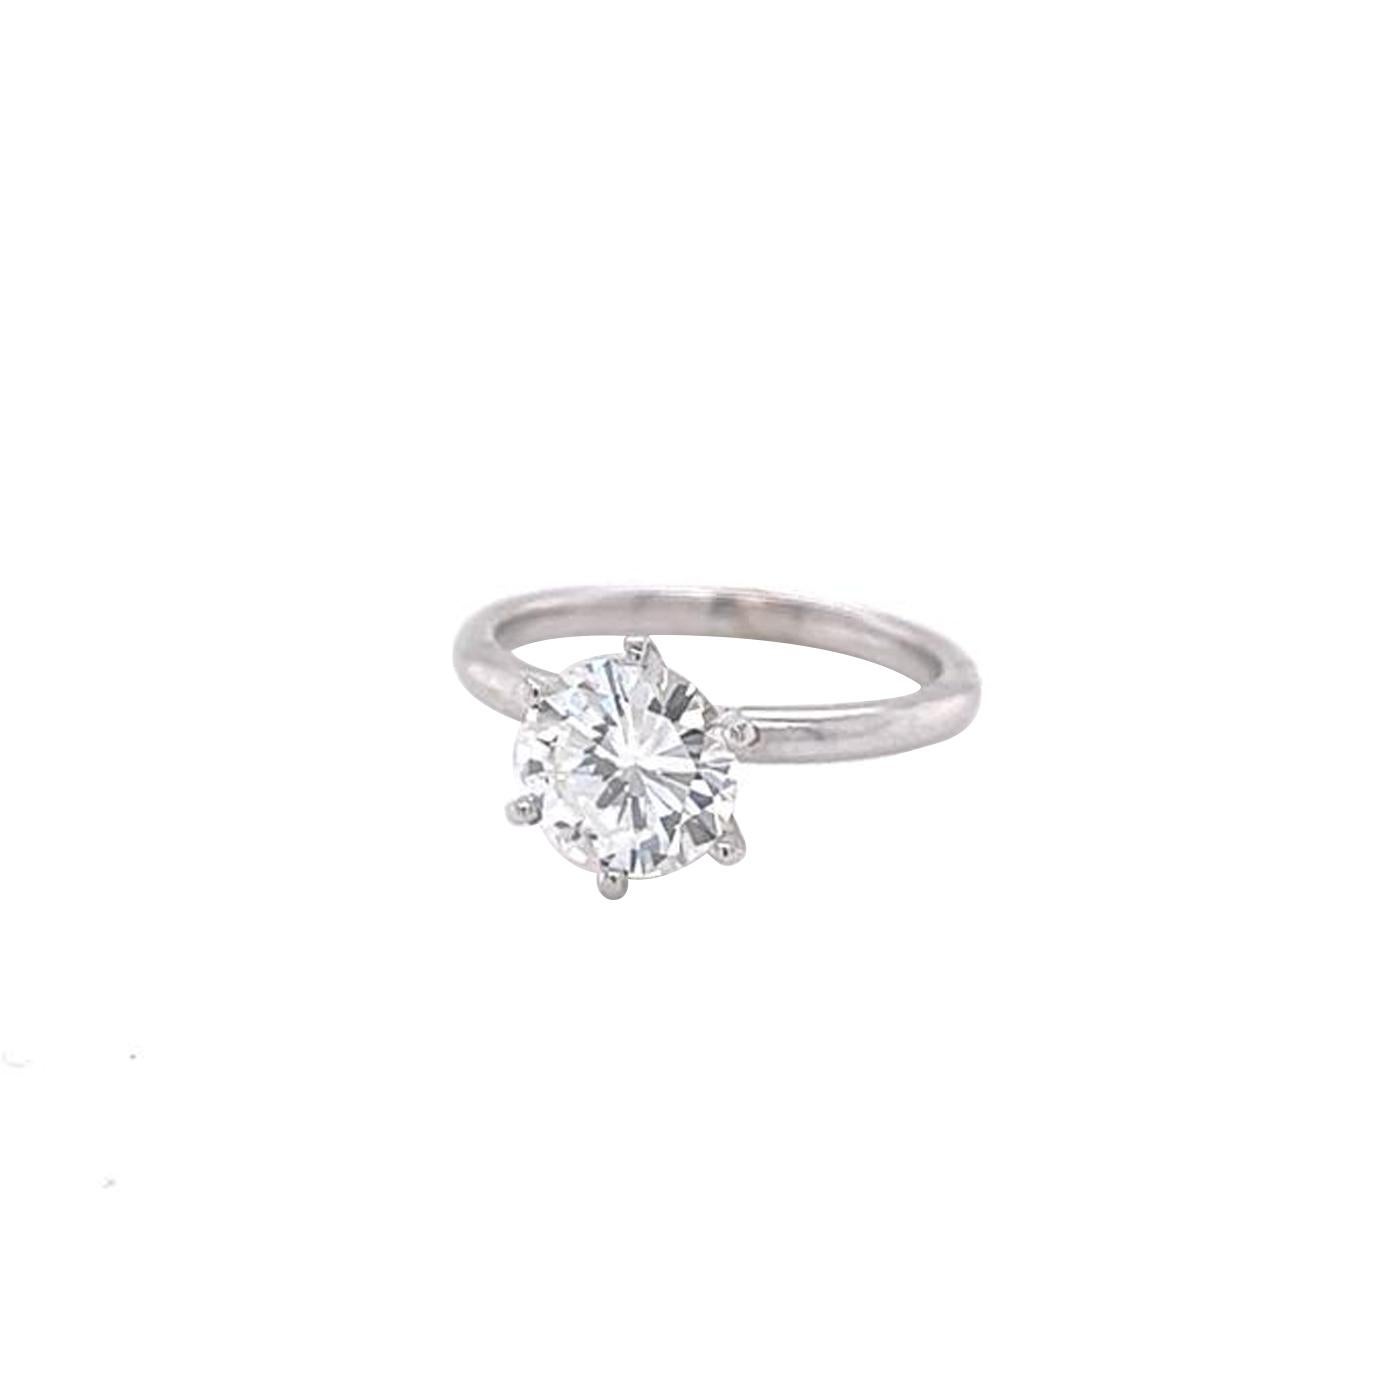 GIA Certified 1.25ct Solitaire Diamond Ring 14k Gold VS1 Clarity Natural H Color In Good Condition For Sale In Aventura, FL